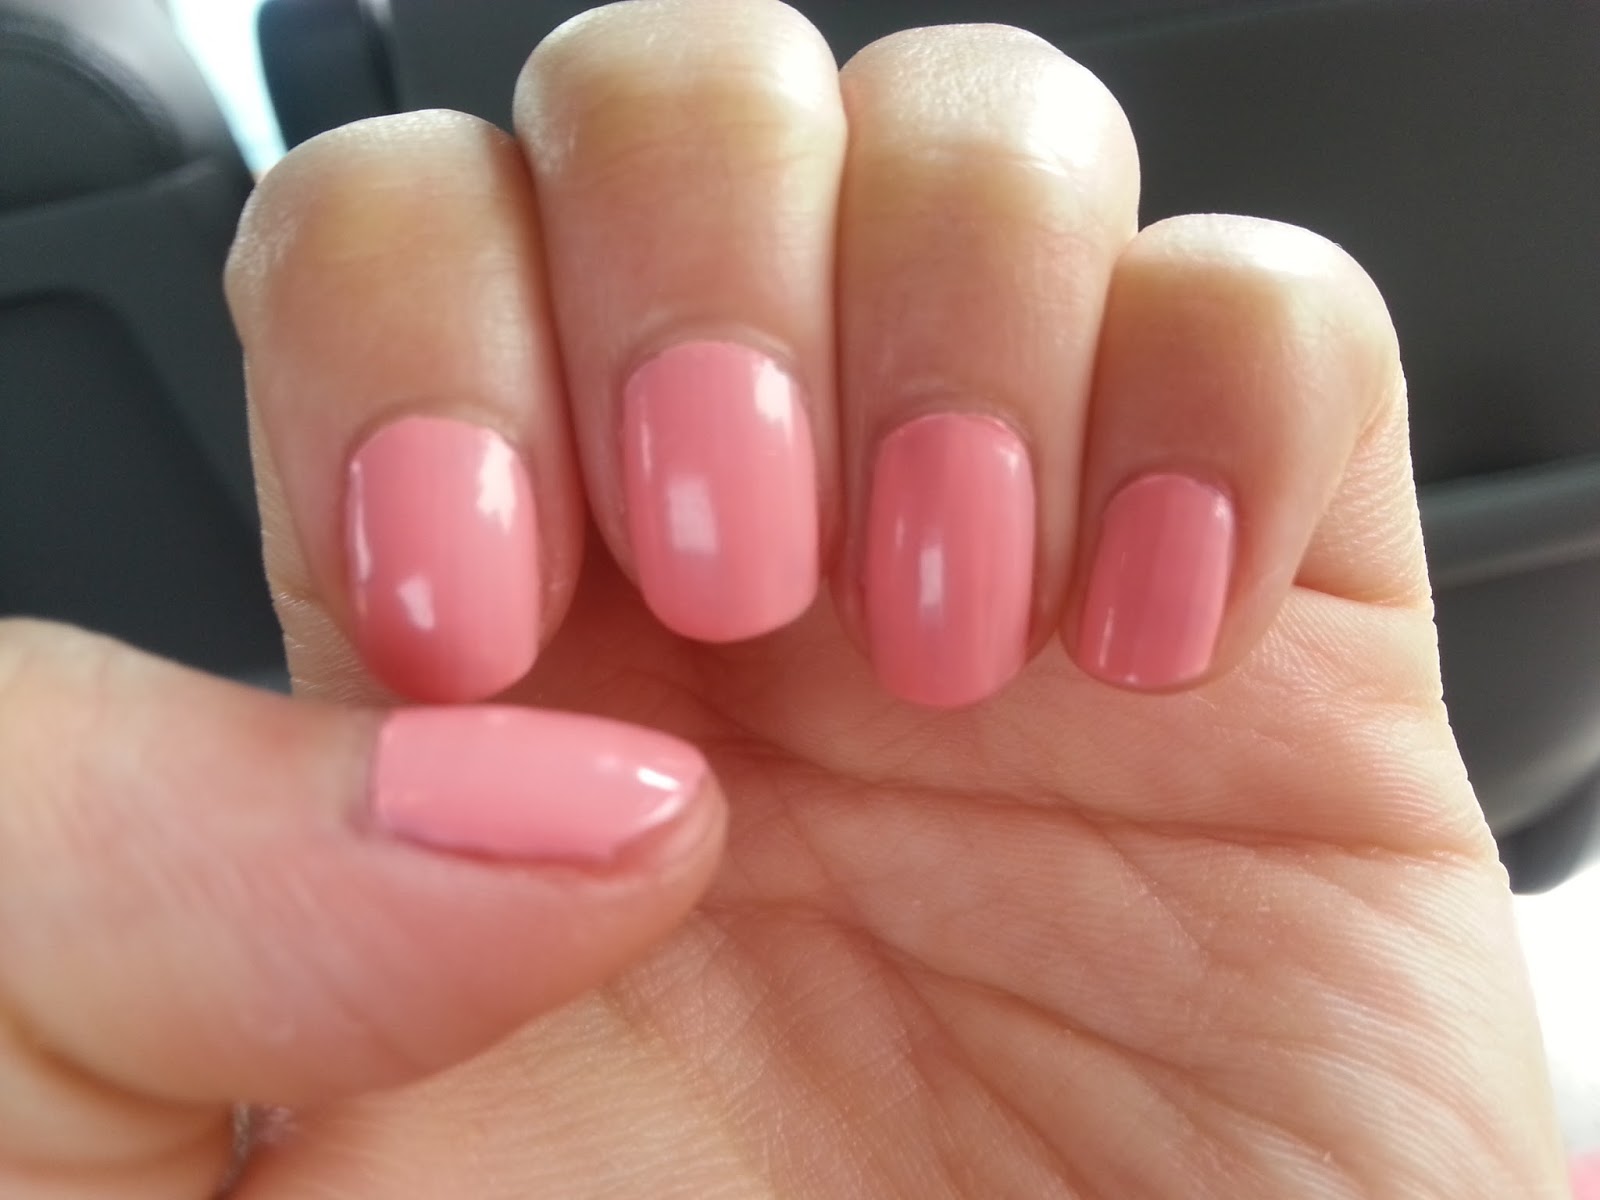 4. Orly Color Blast in "Cotton Candy" - wide 9